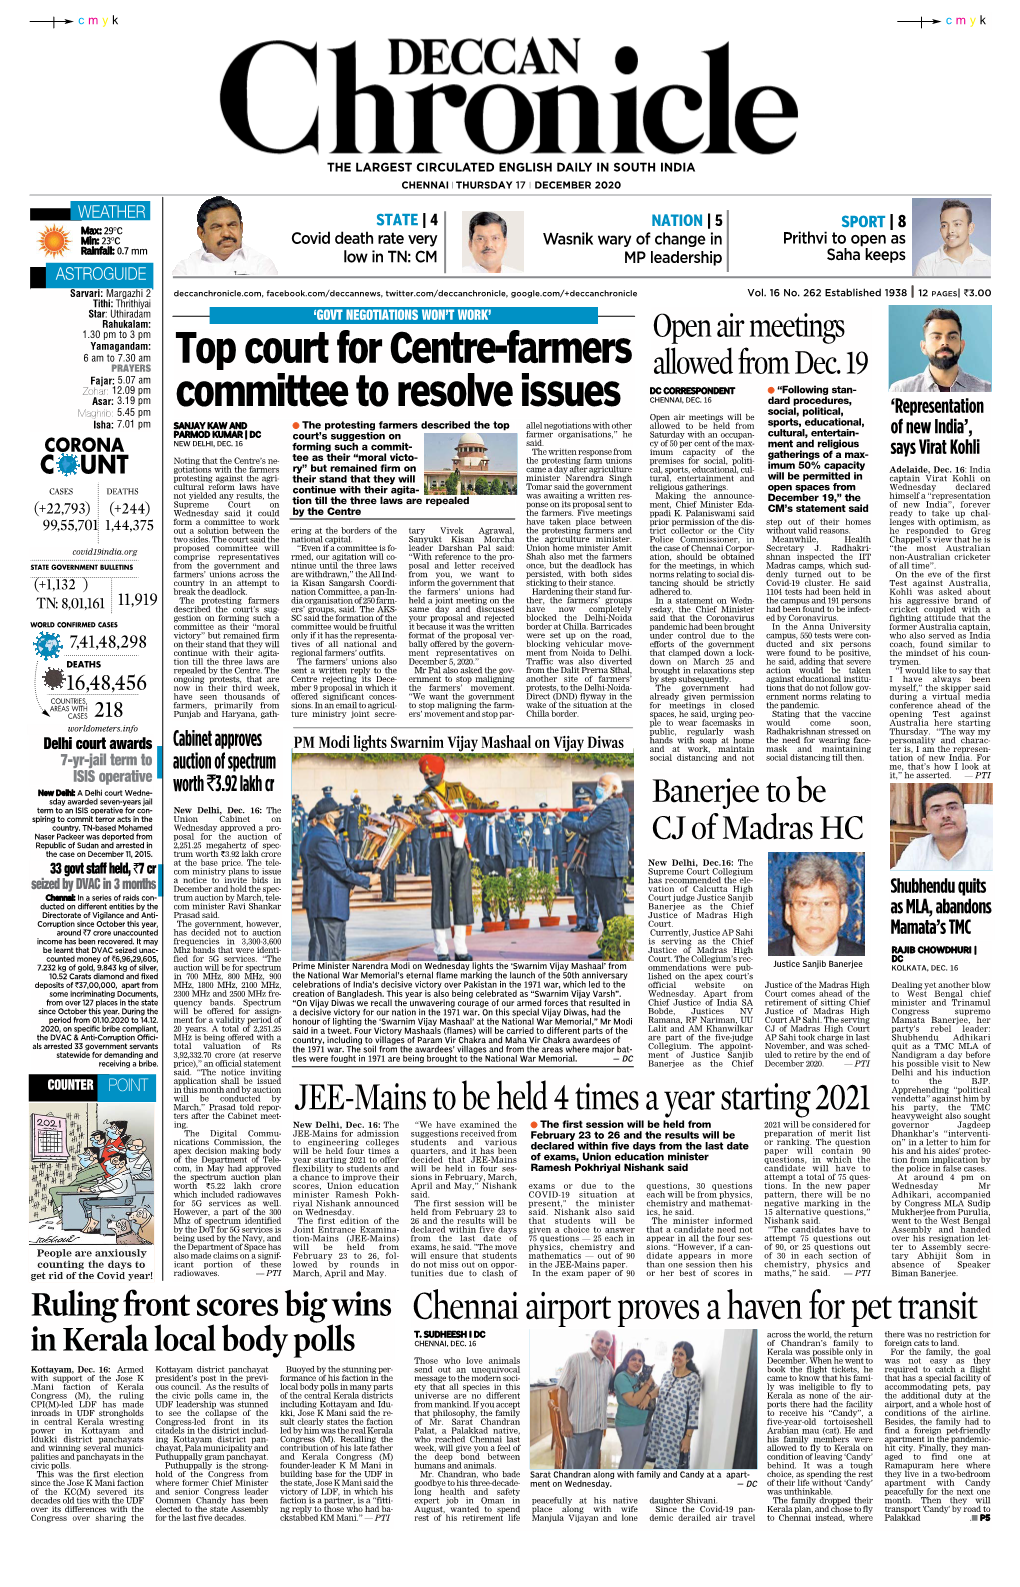 Top Court for Centre-Farmers Committee to Resolve Issues